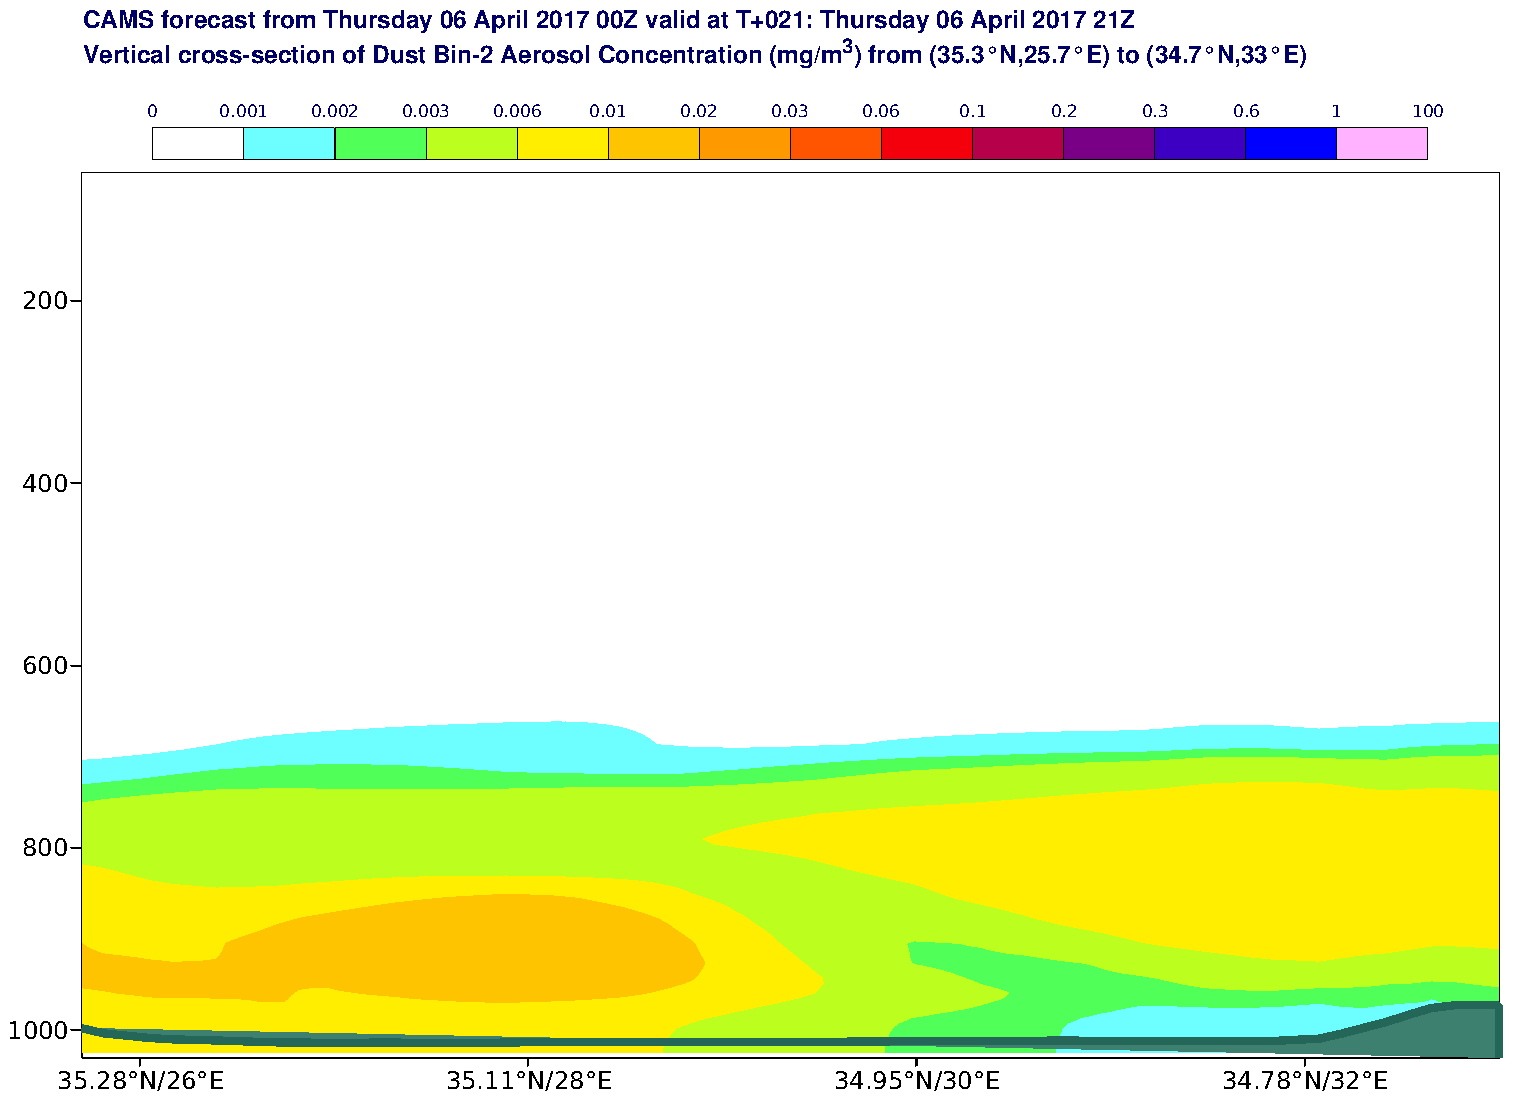 Vertical cross-section of Dust Bin-2 Aerosol Concentration (mg/m3) valid at T21 - 2017-04-06 21:00